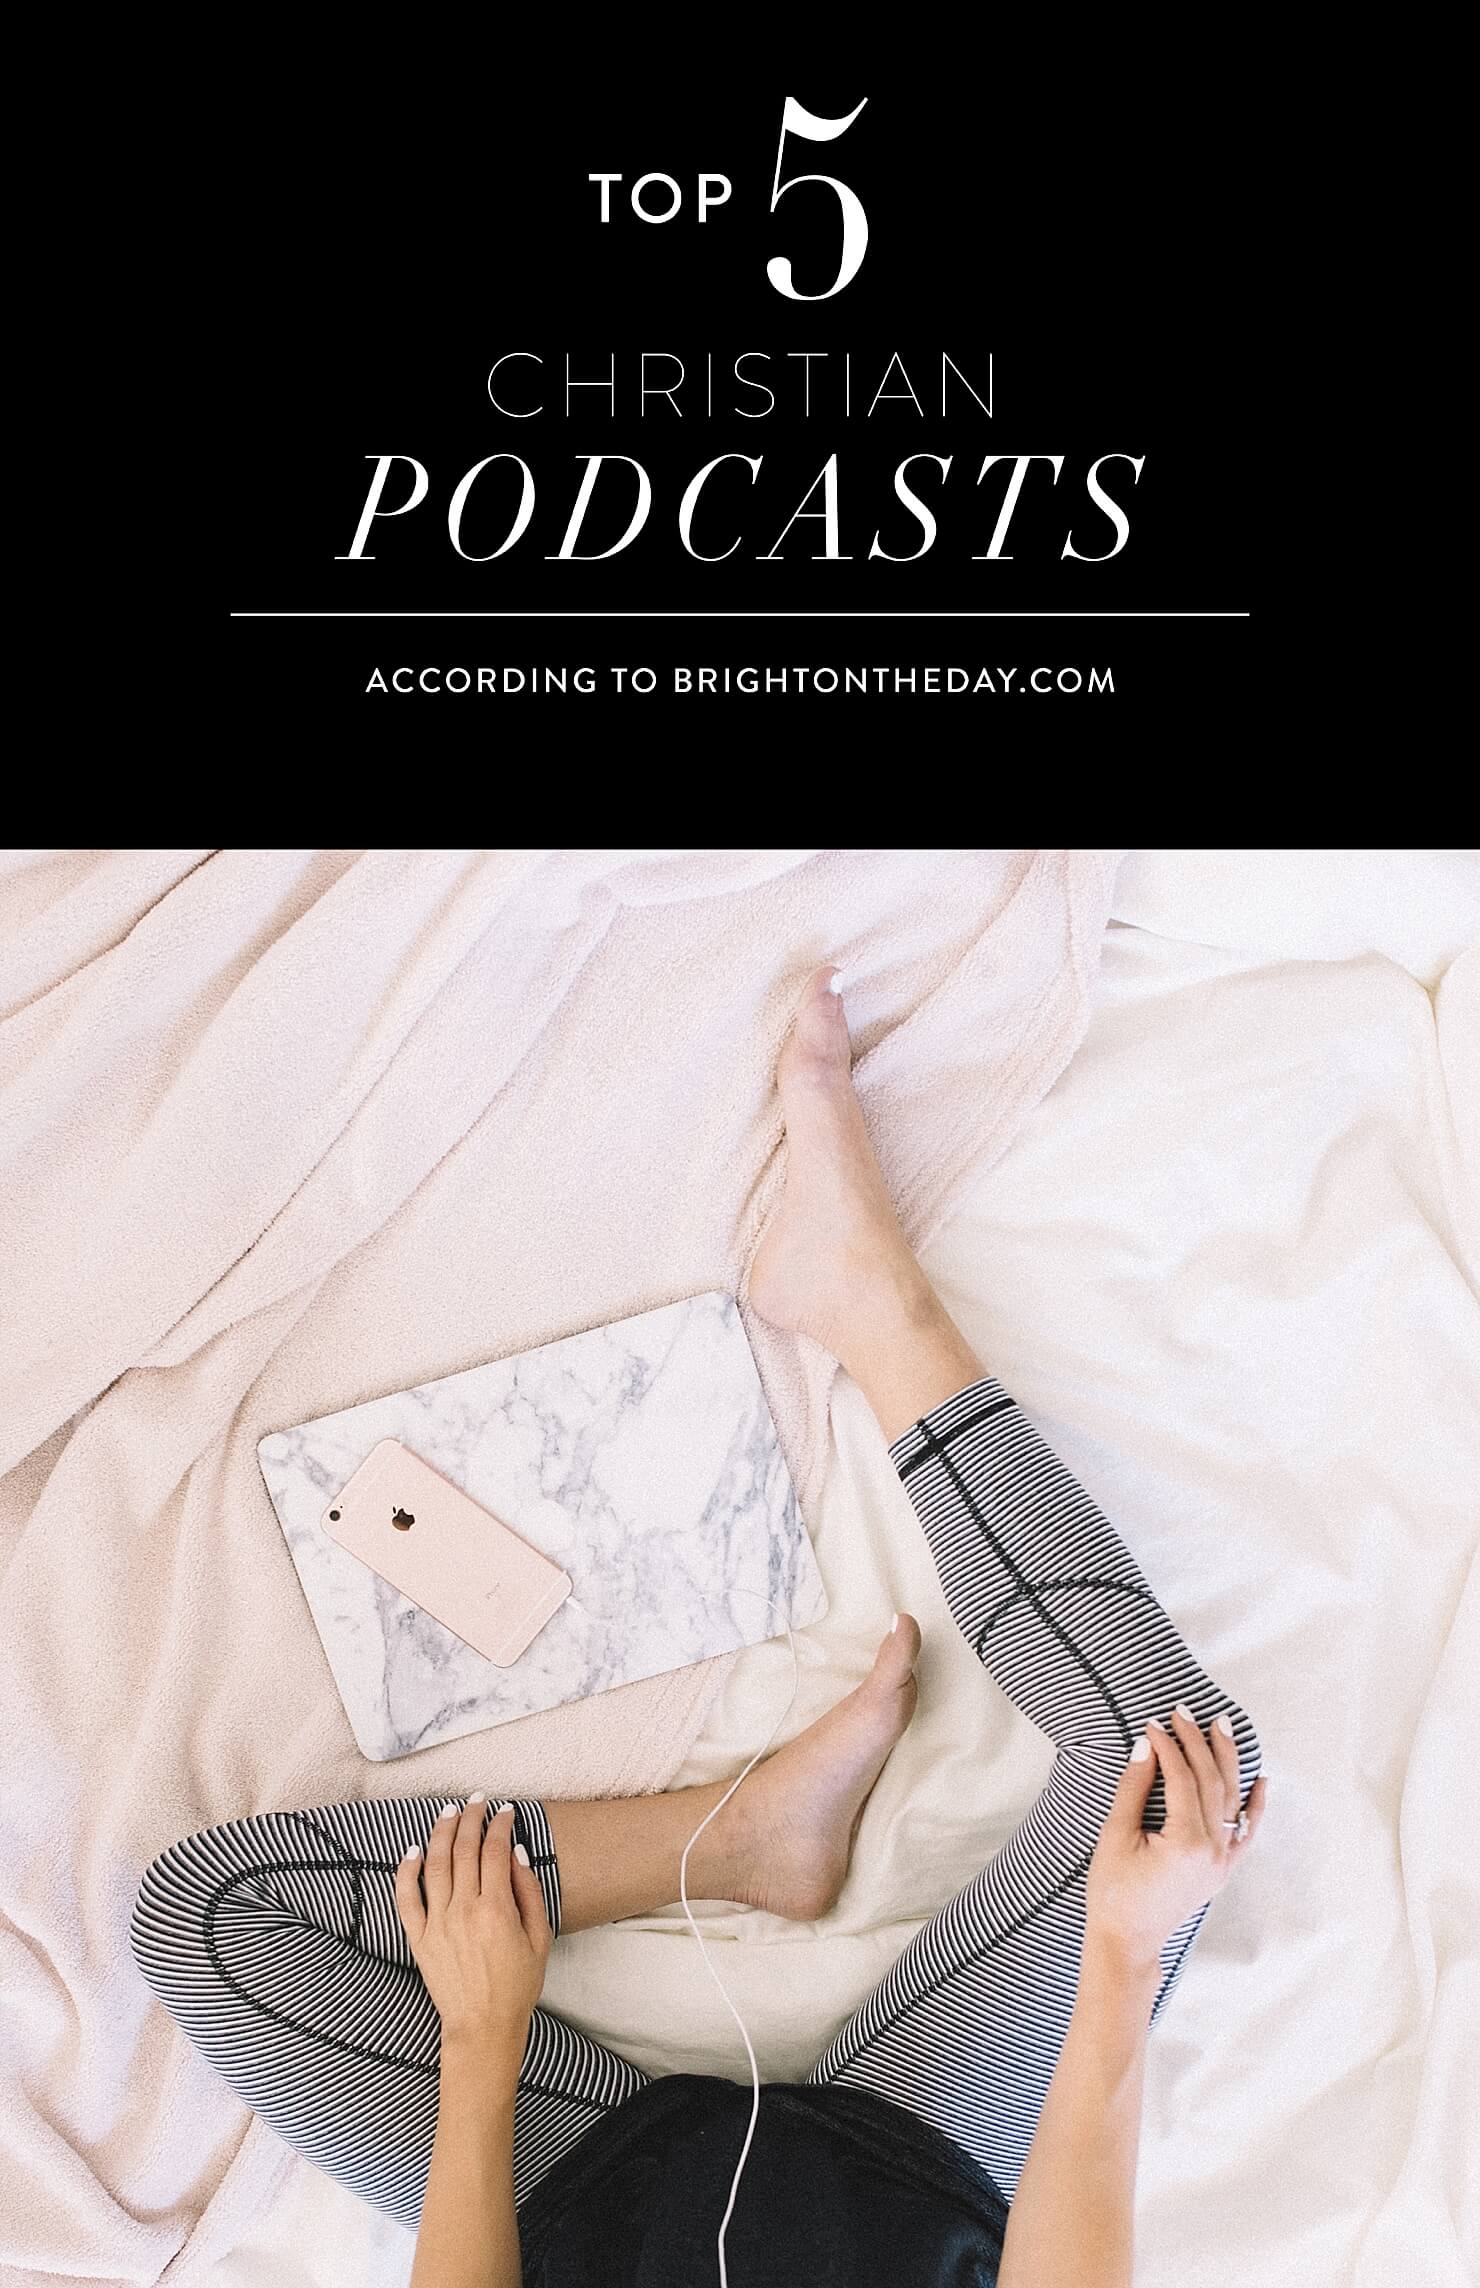 The Best Christian Podcasts - My Favorite Go-To Faith-Based Podcasts